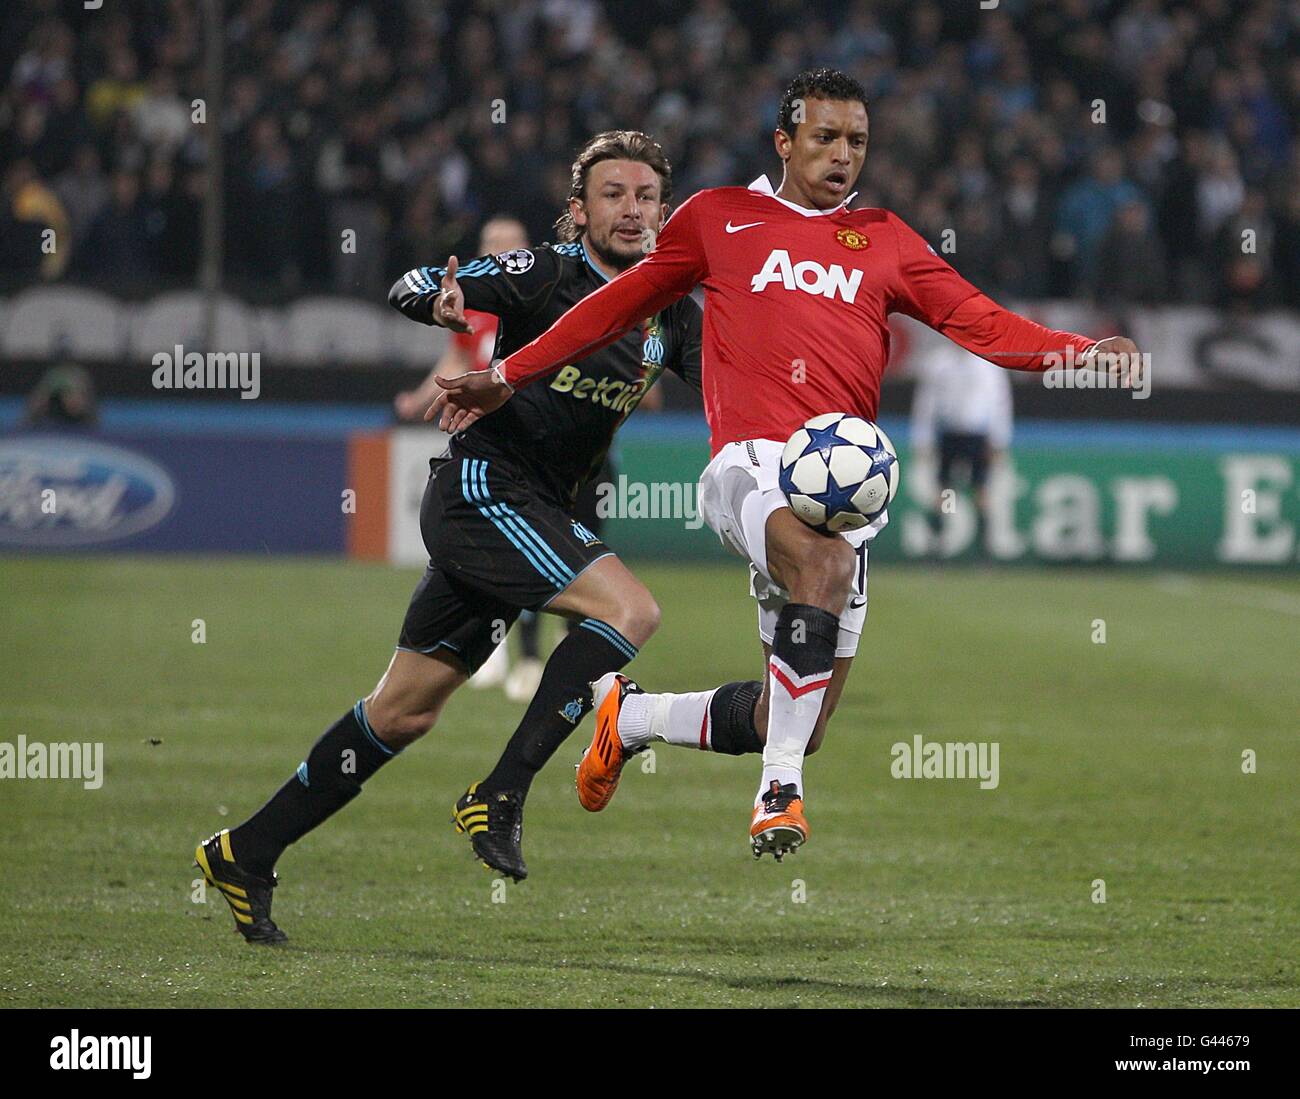 Soccer - UEFA Champions League - Round of 16 - First Leg - Olympique de Marseille v Manchester United - Stade Velodrome. Olympique de Marseille's Gabriel Heinze (left) and Manchester United's Luis Nani (right) in action Stock Photo